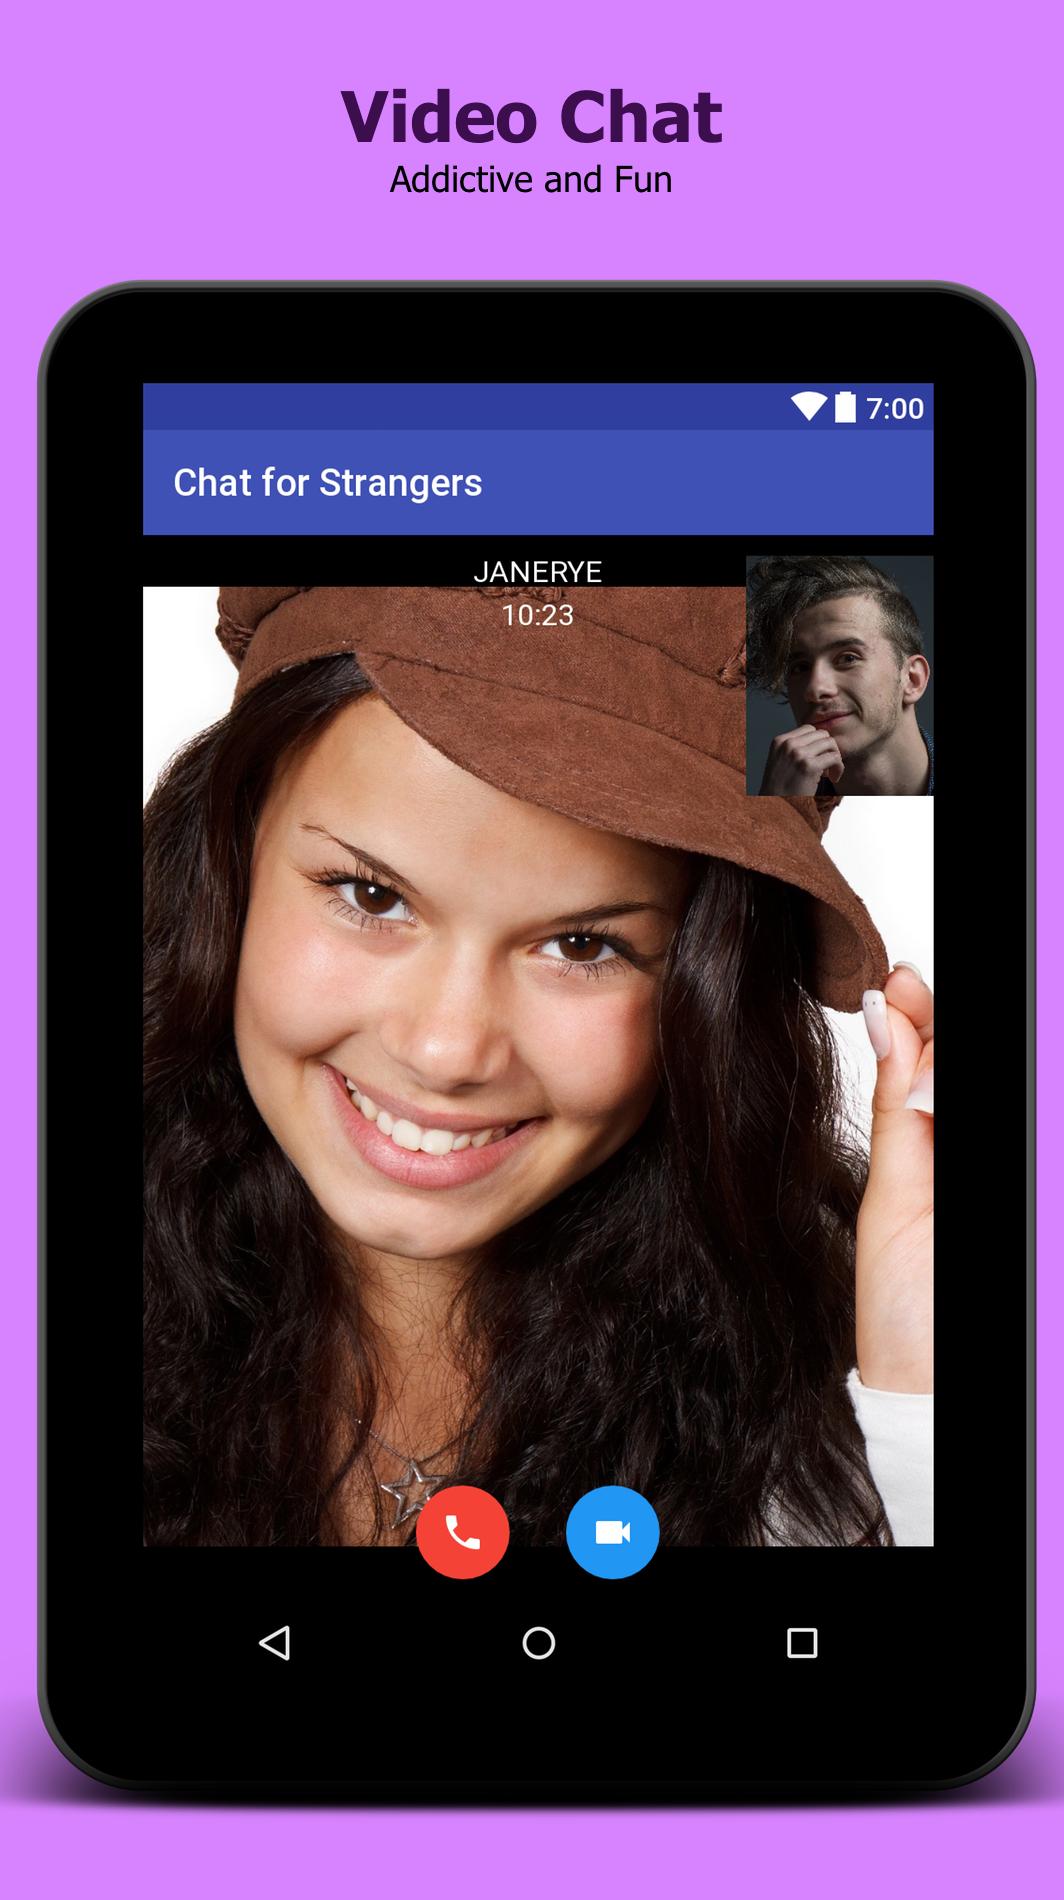 Chat For Strangers - Video Chat 스크린샷 8.